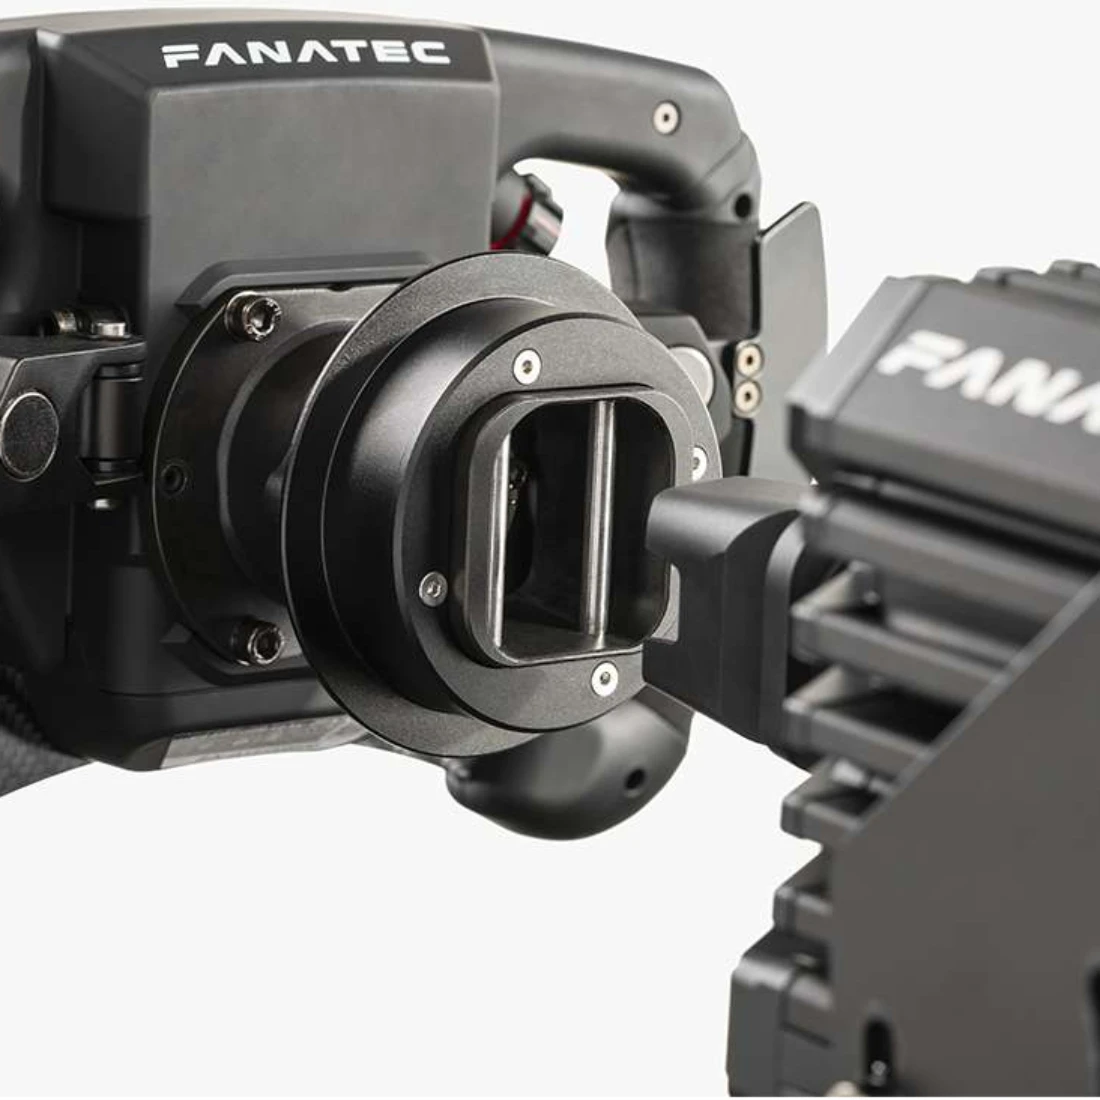 In Stock Newest Qr2 Wheel-side And Qr2 Pro Wheel-side For Fanatec Steering Wheel Accessories Fanatec QR2